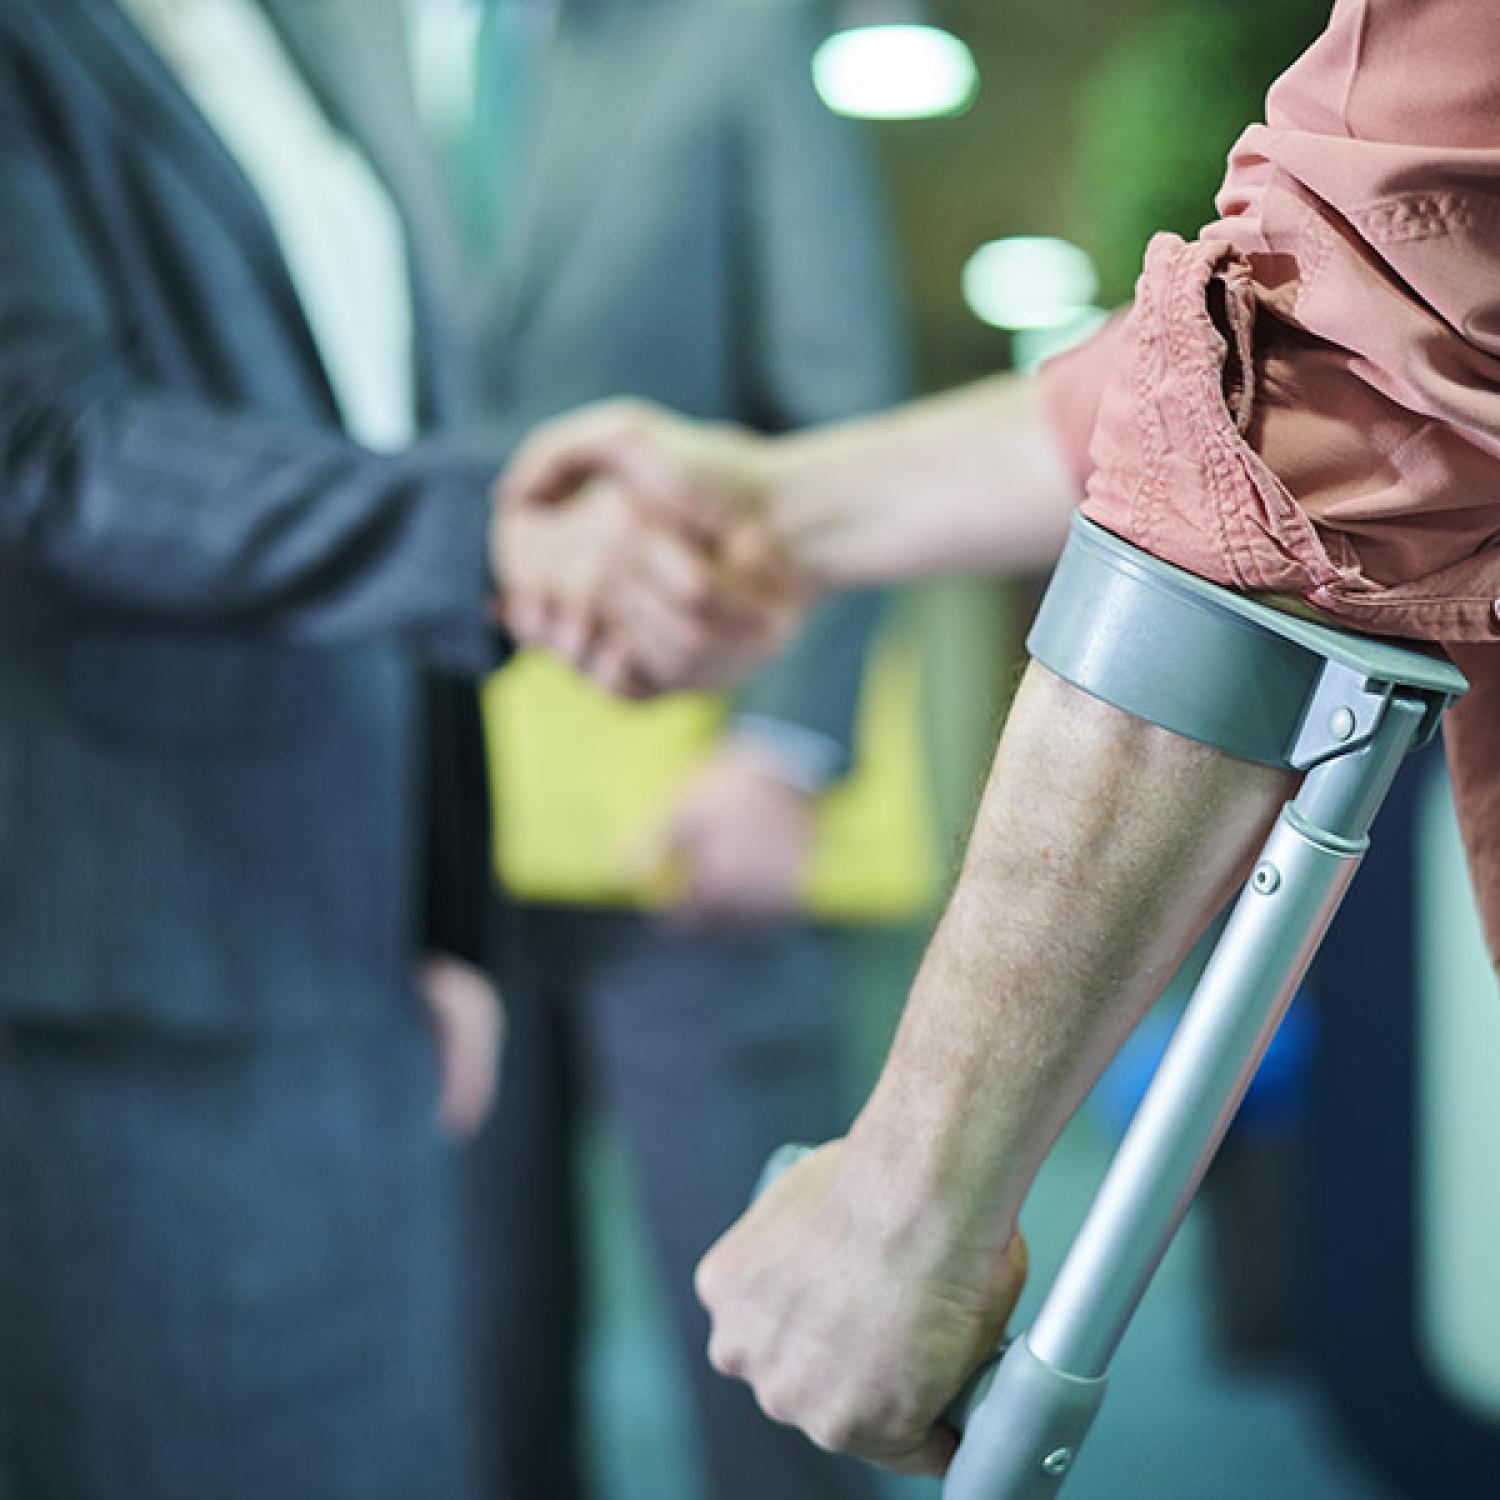 Person using a crutch, shaking hands with someone